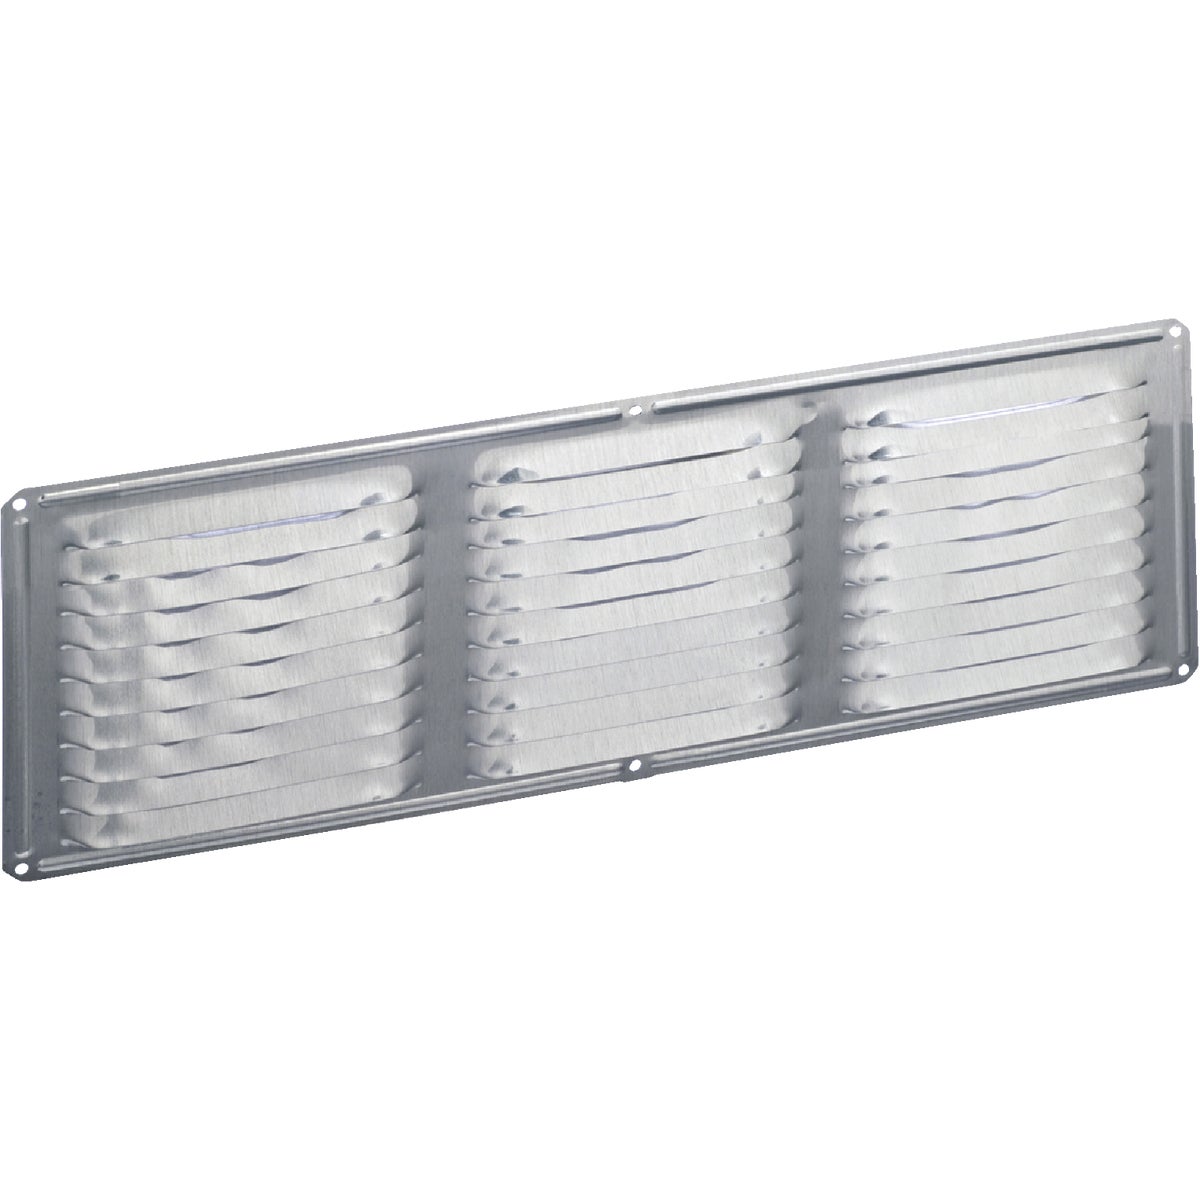 Air Vent 84115 Air Vent 16 In. W. x 6 In. L. Mill Under Eave Vent 84115